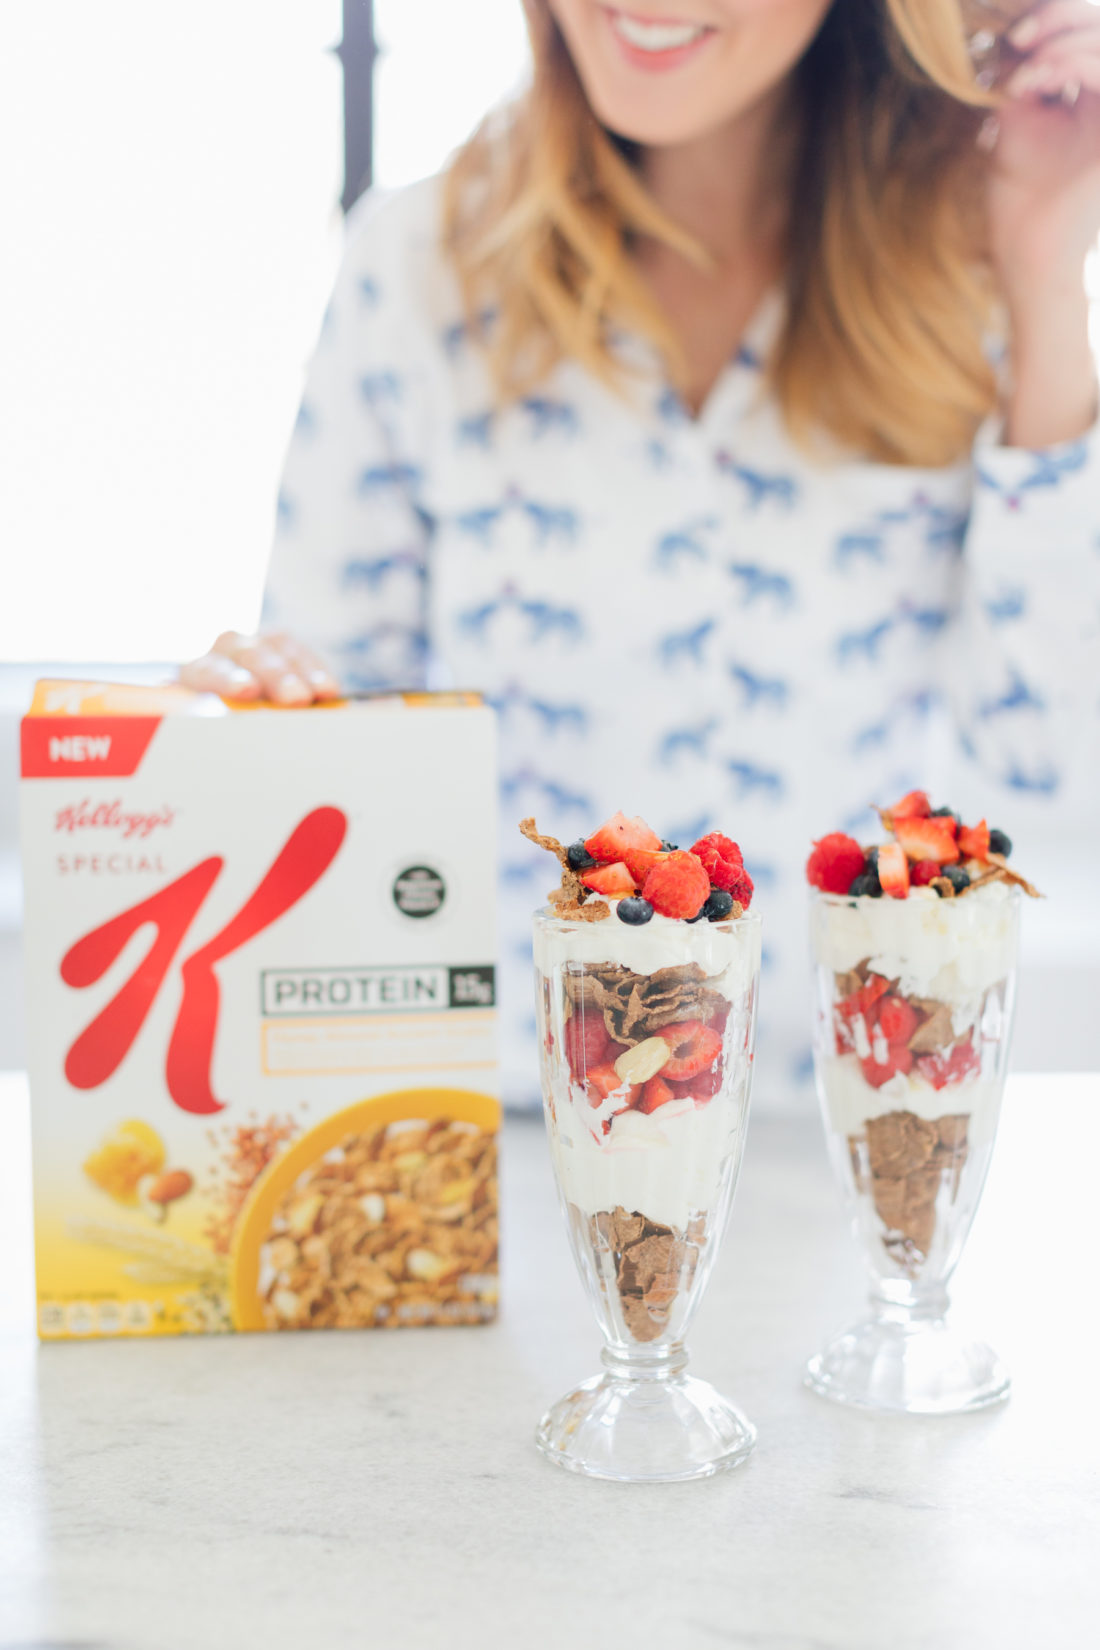 Eva Amurri Martino of Happily Eva After shows off her yogurt parfaits with Special K Ancient Grains